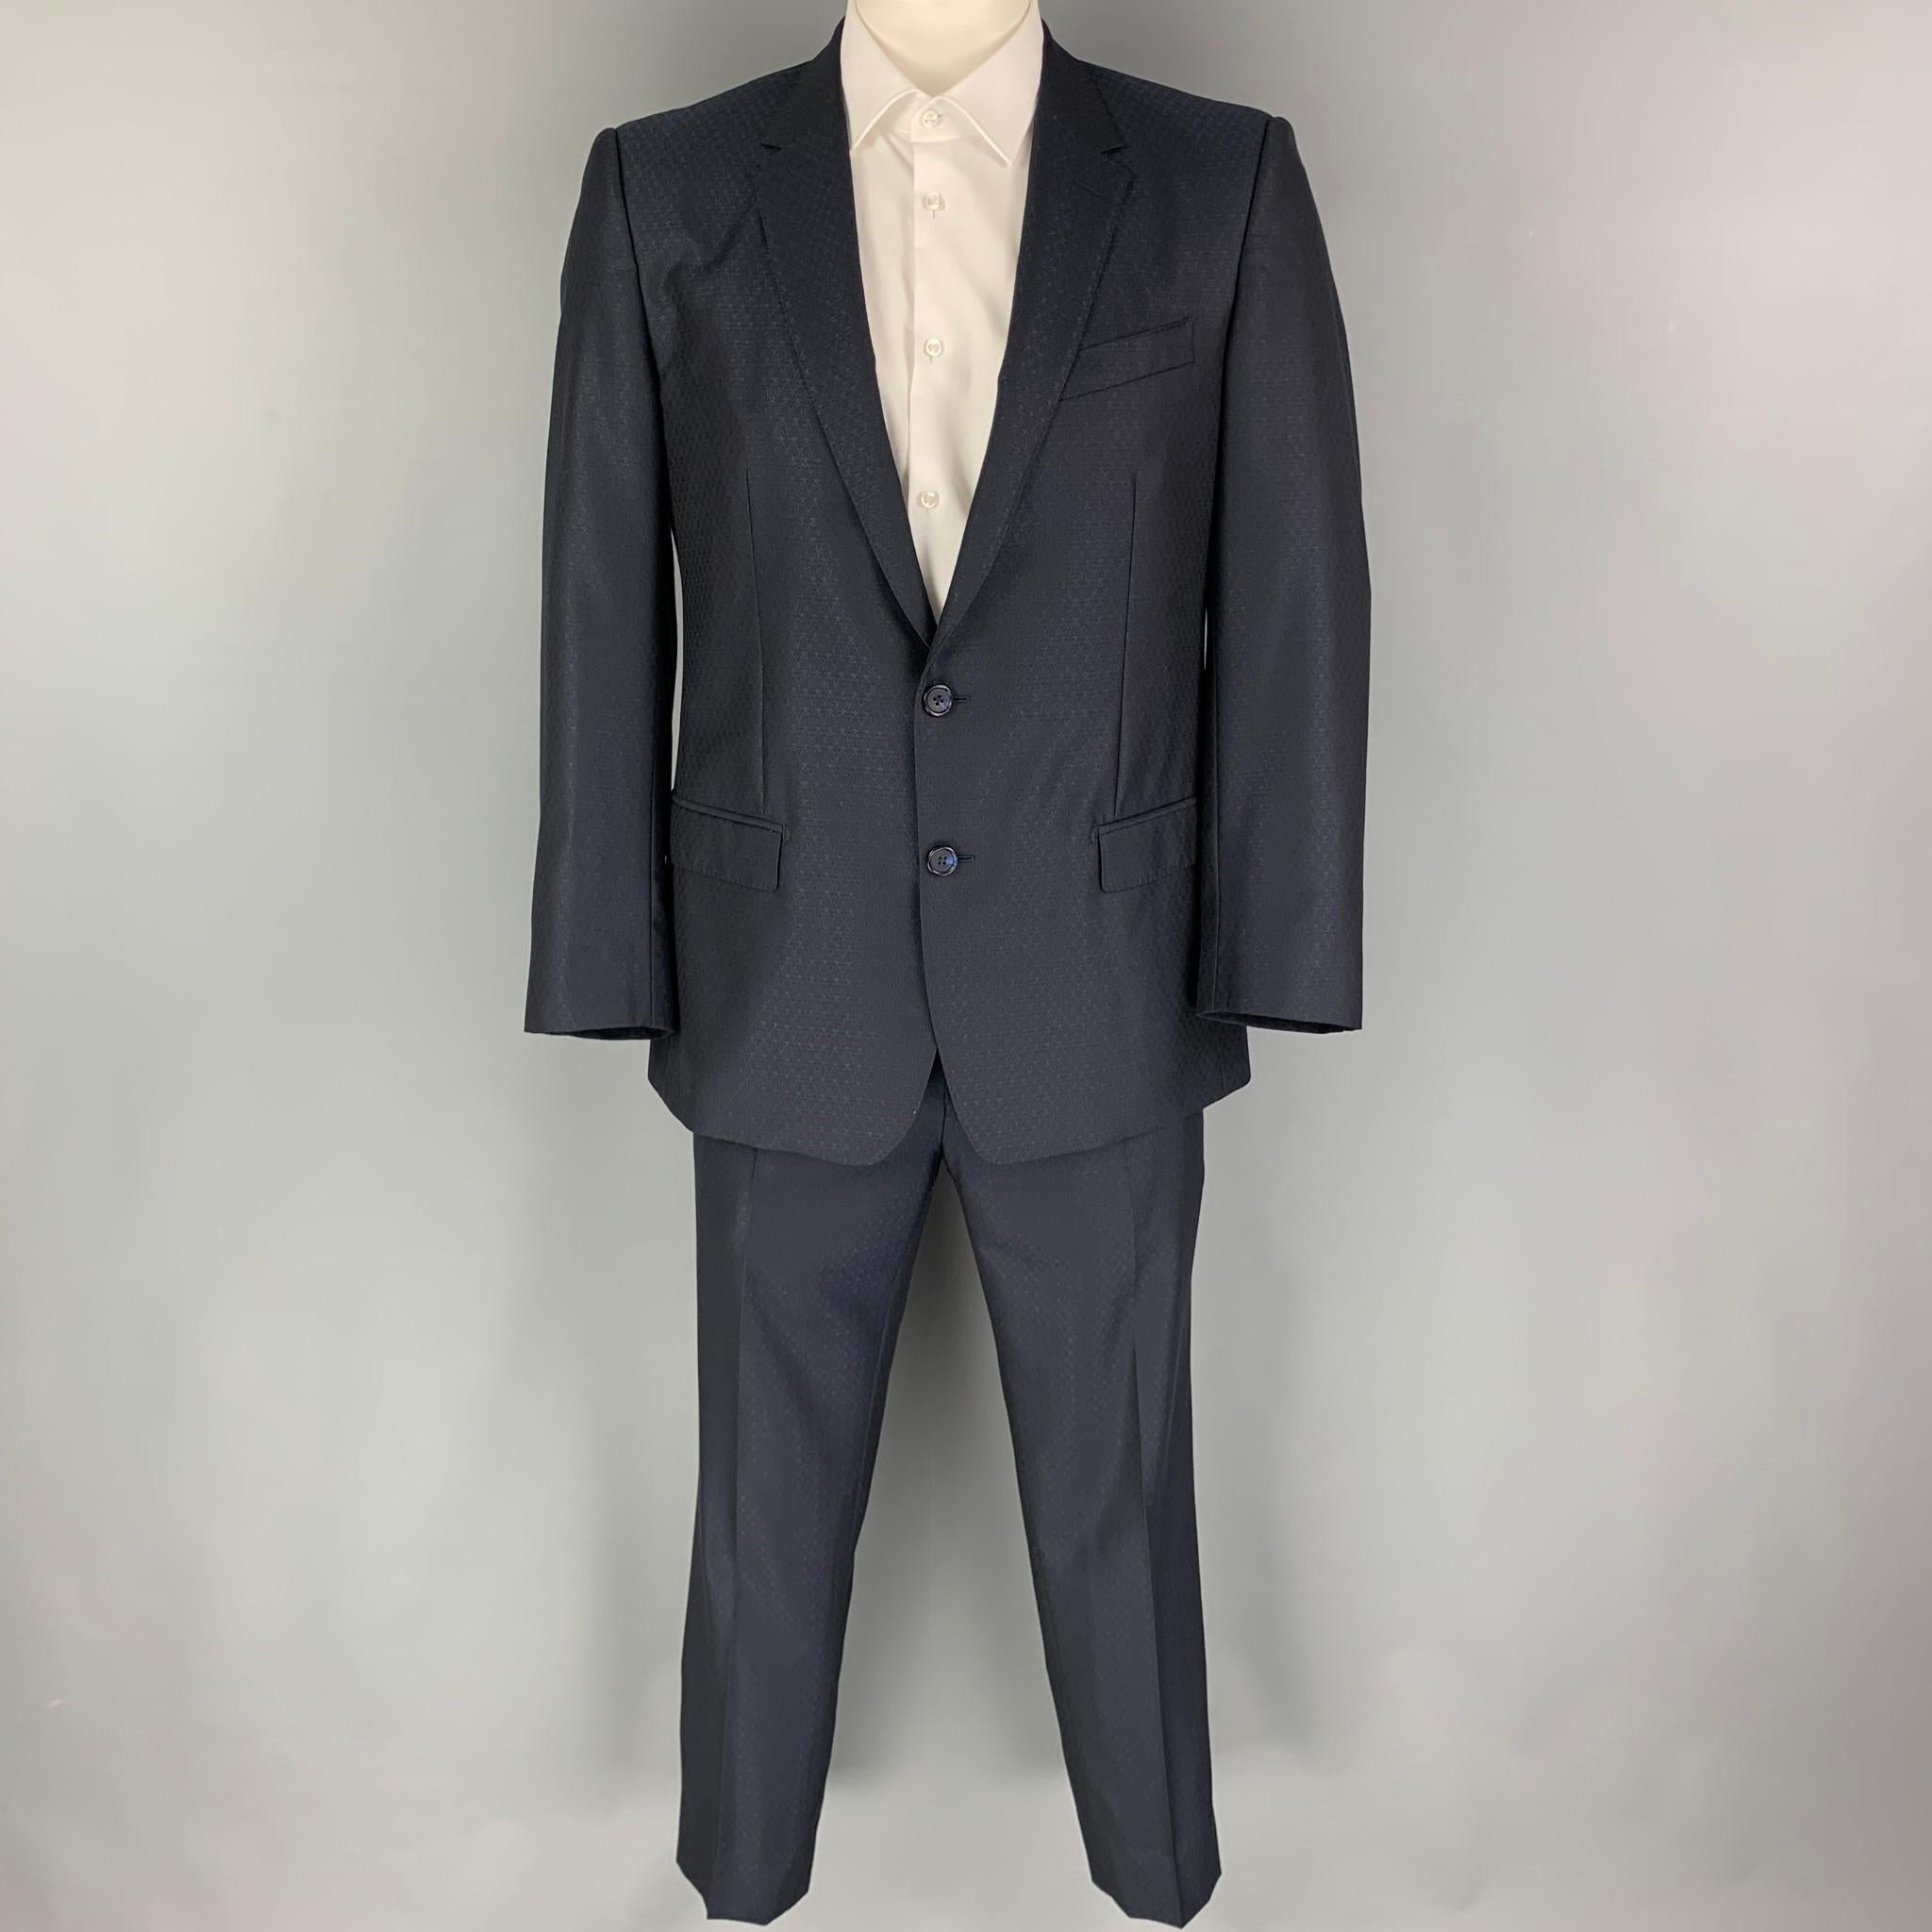 DOLCE & GABBANA suit comes in a navy print wool blend with a full liner and includes a single breasted, double button sport coat with a notch lapel and matching flat front trousers.

Excellent Pre-Owned Condition.
Marked: